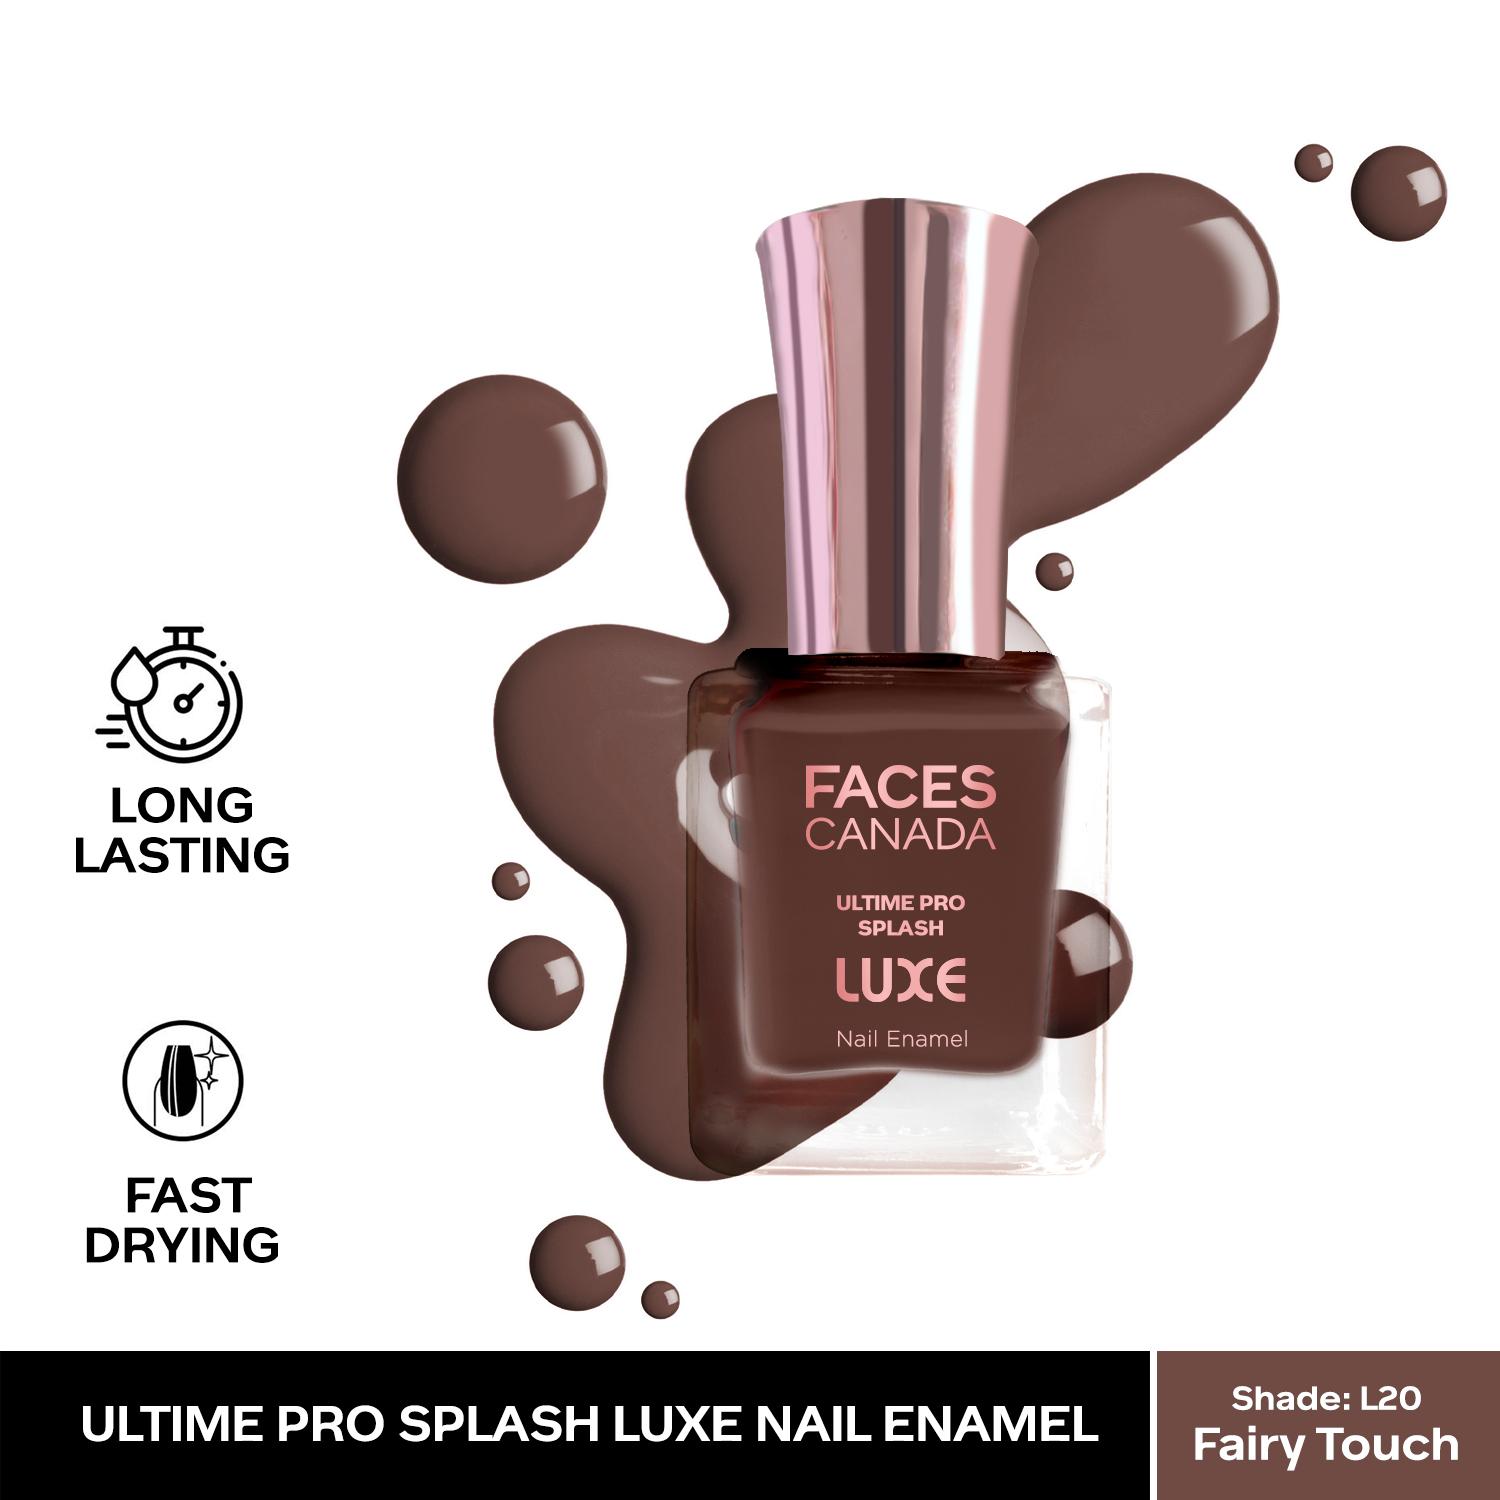 Faces Canada | Faces Canada Ultime Pro Splash Luxe Nail Enamel - Fairy Touch (L20), Glossy Finish (12 ml)